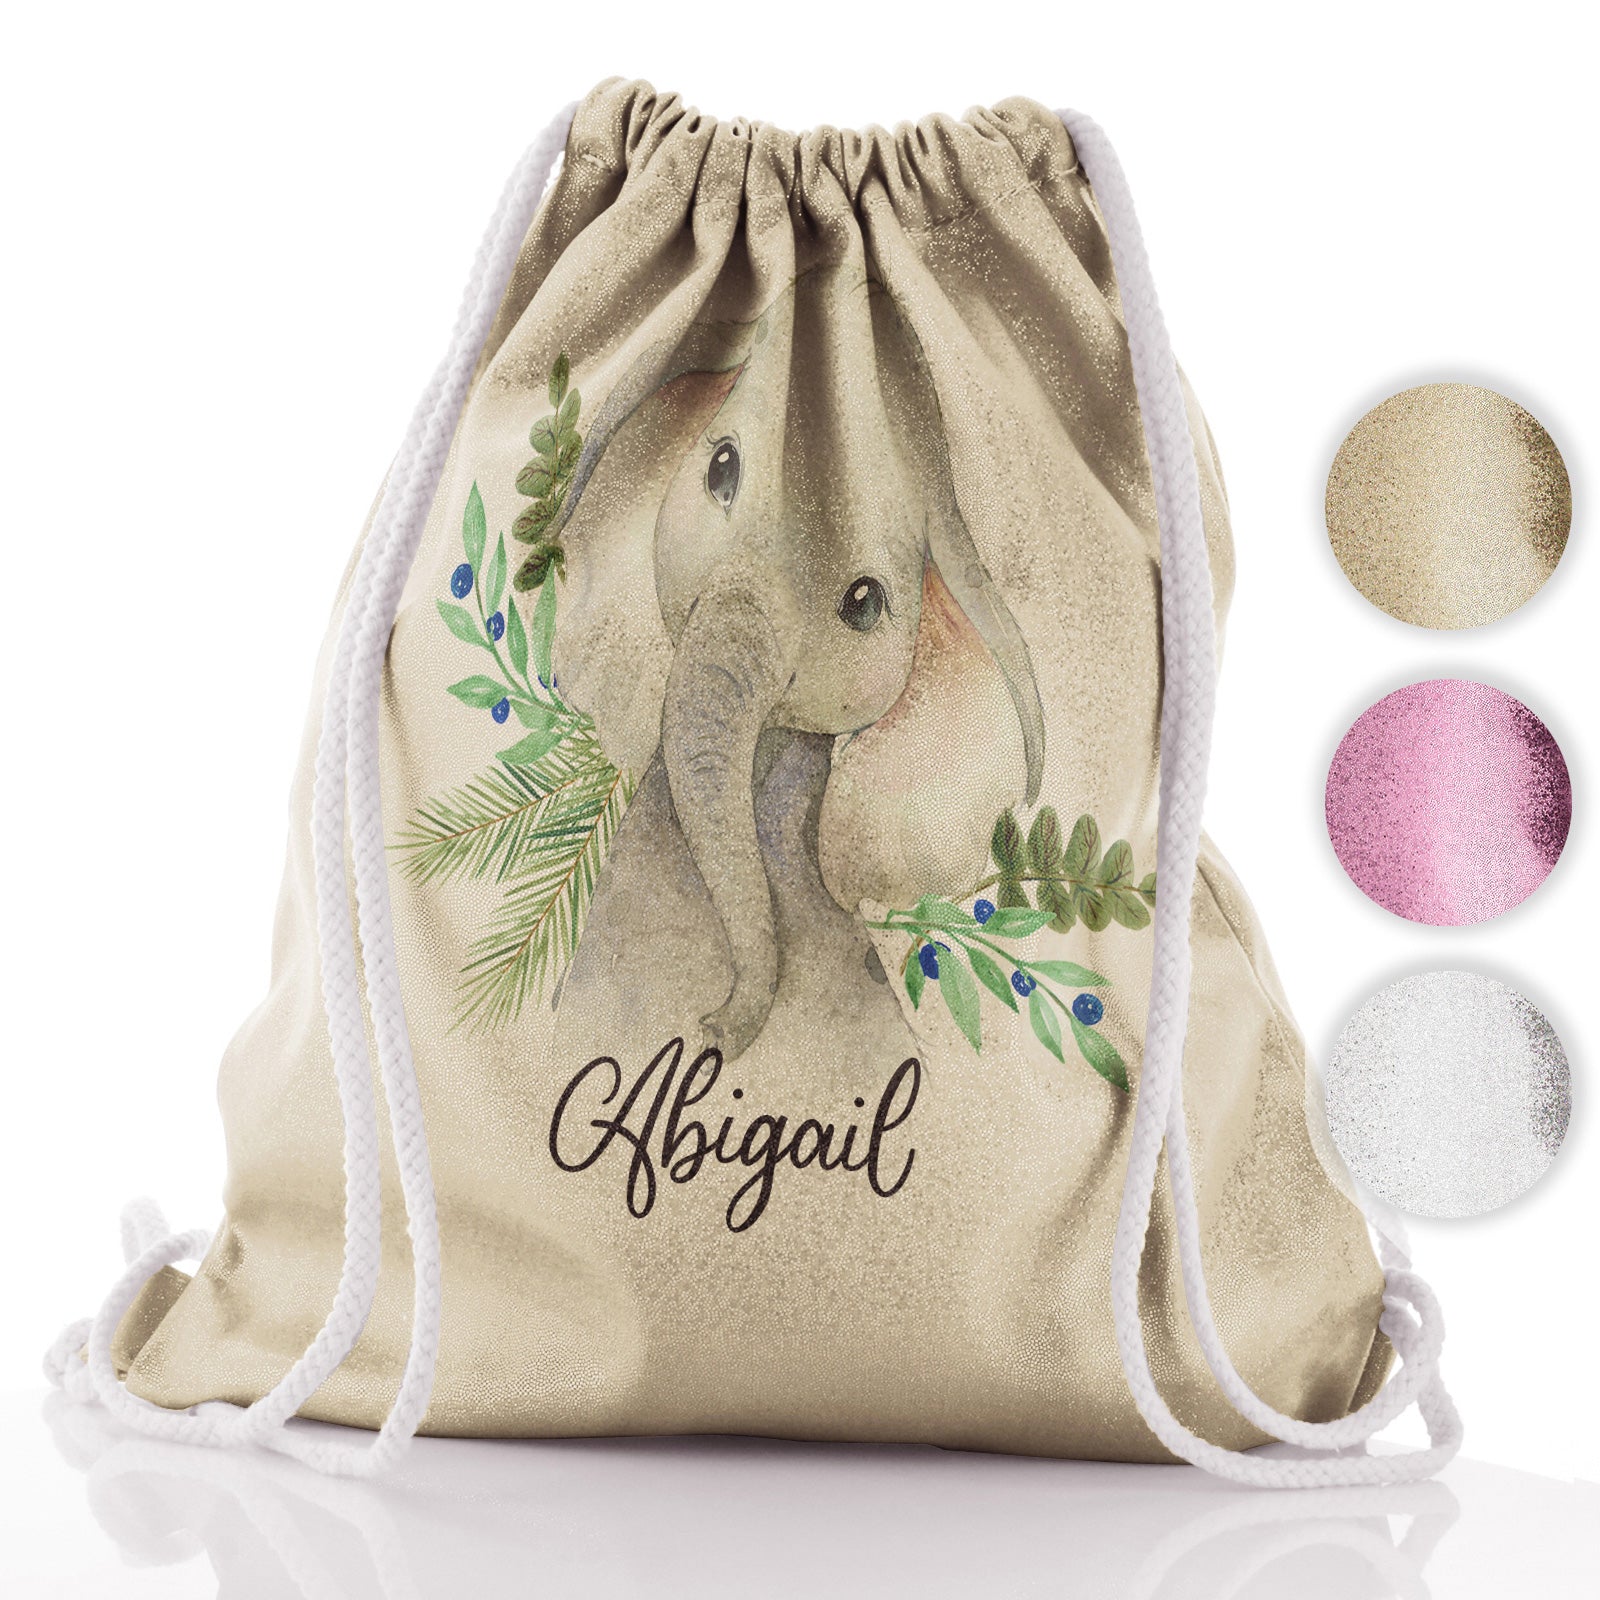 Personalised Glitter Drawstring Backpack with Elephant Blue Berries and Cute Text